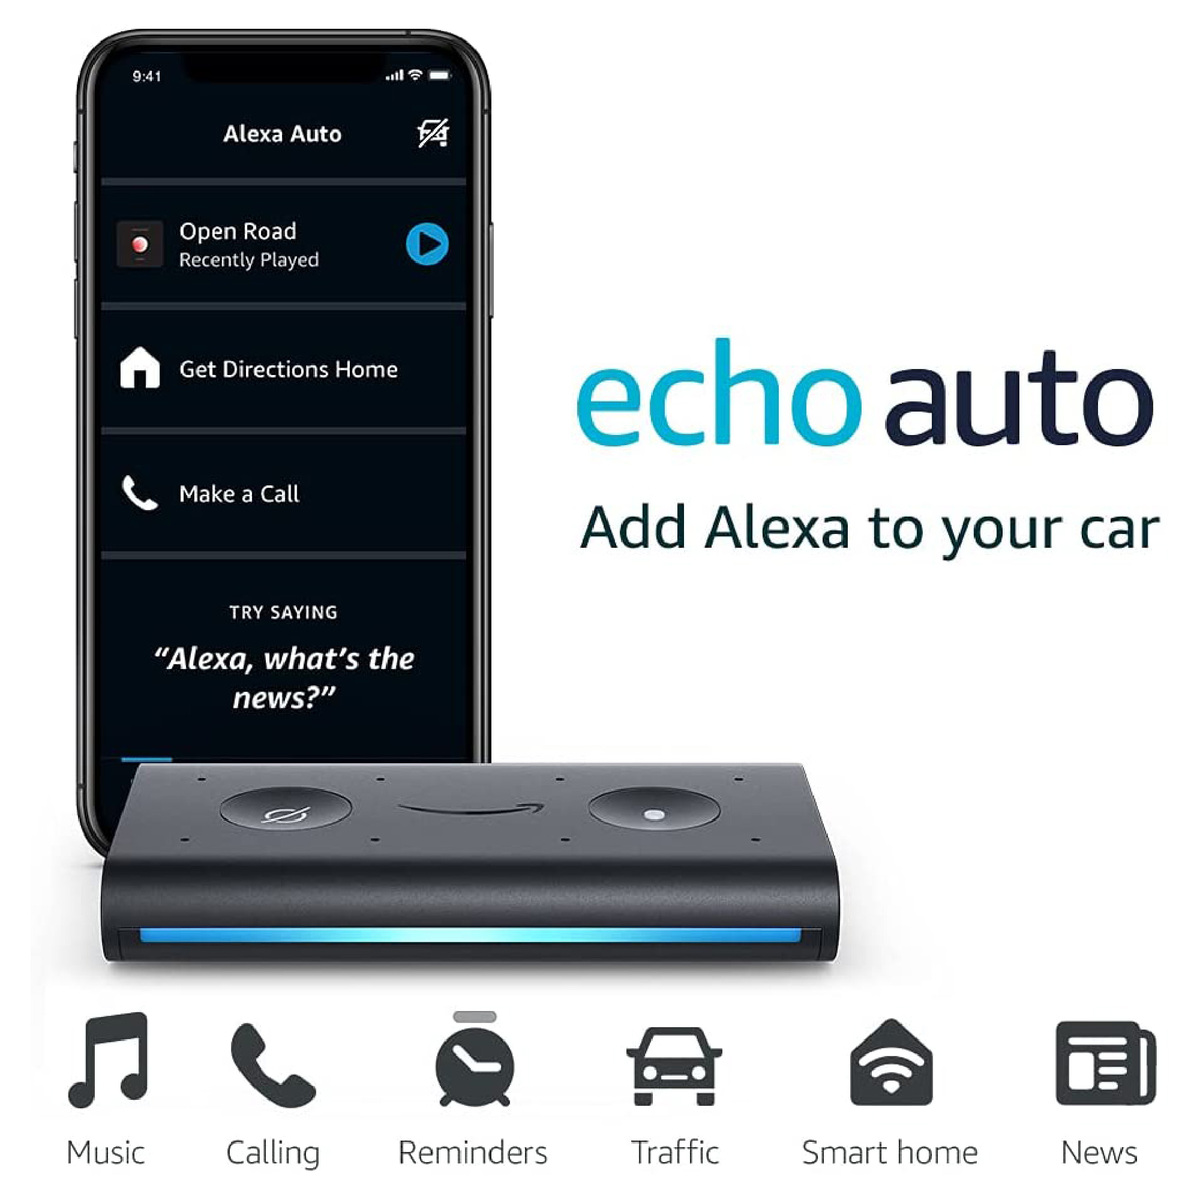 Amazon Echo Auto Hands-free Alexa in your car with your phone